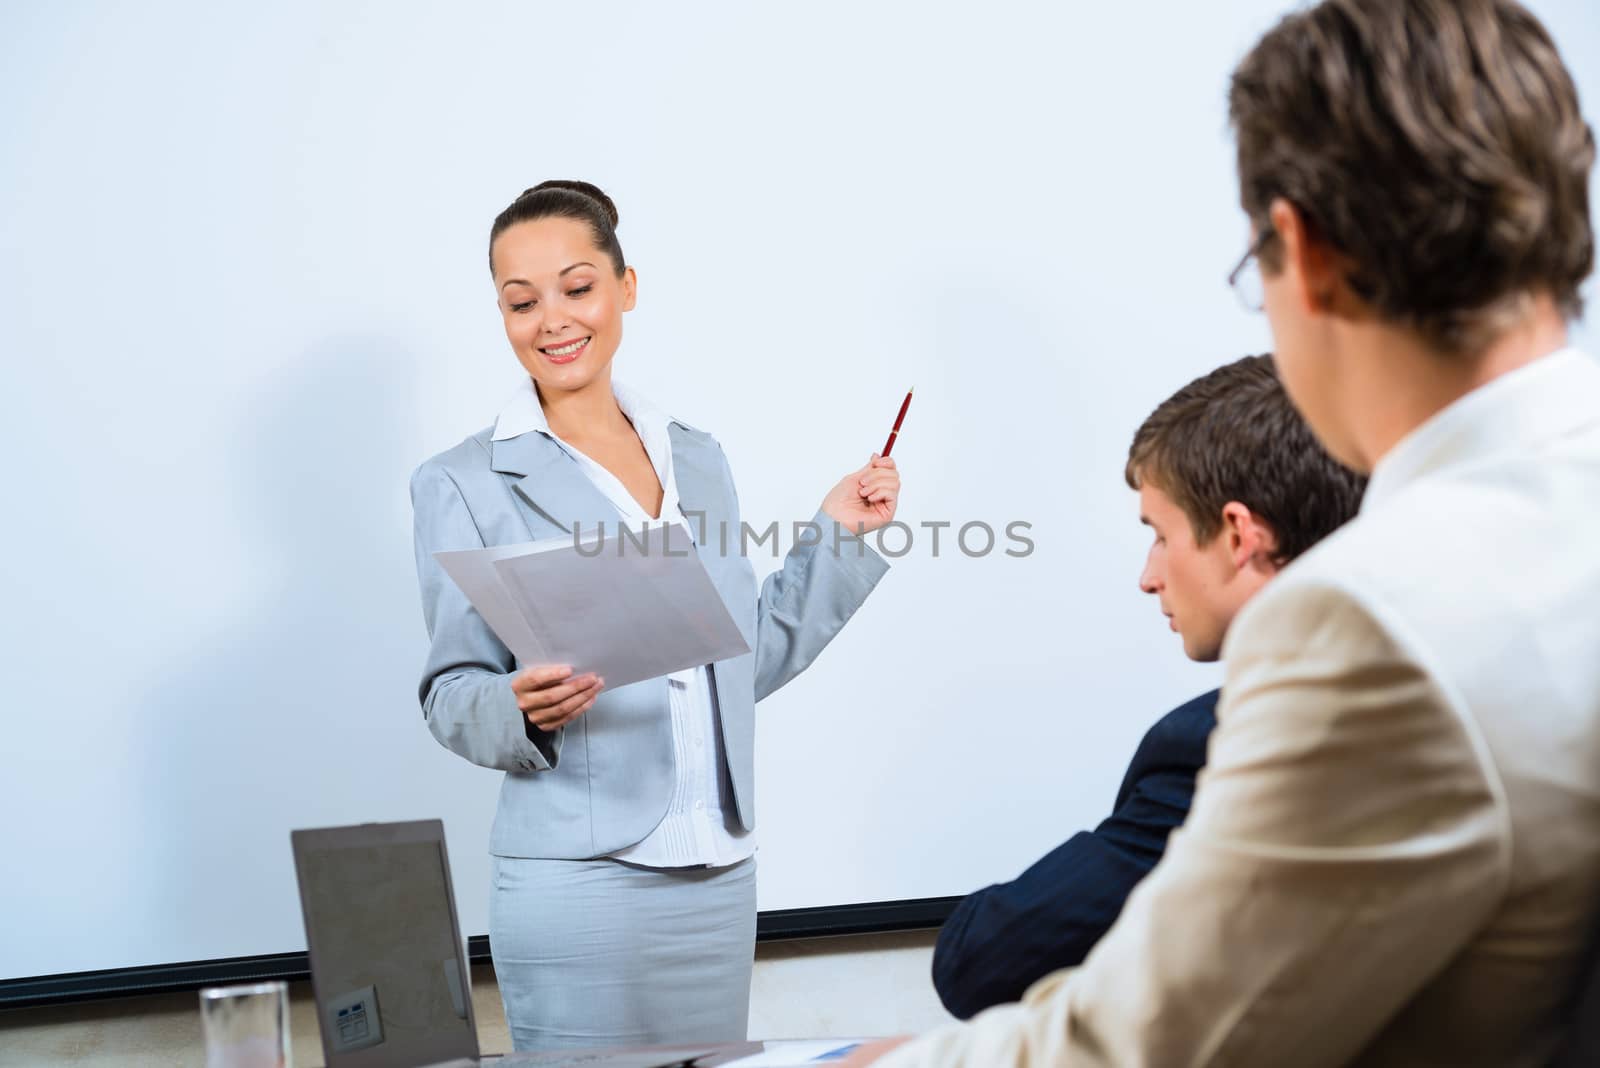 image of a discusses business woman with colleagues